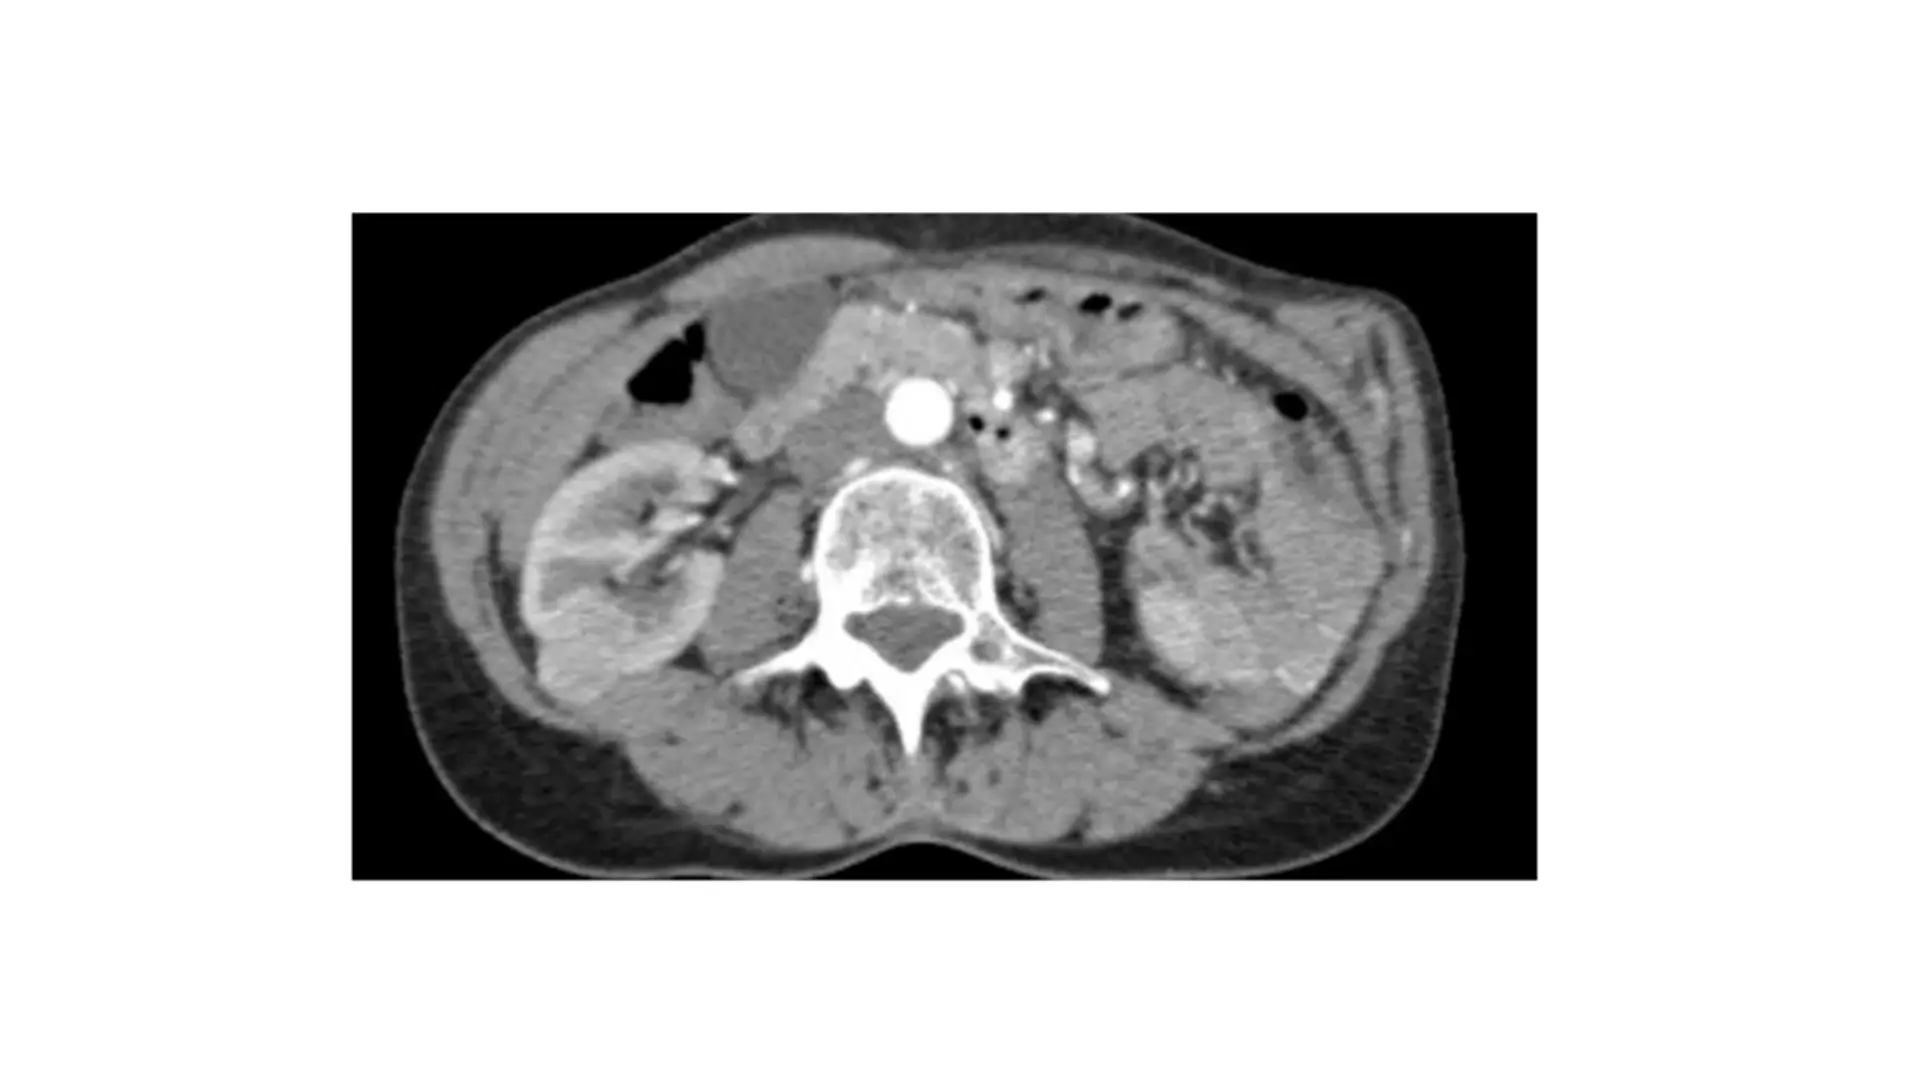 A posterior tumor that is ideal for the retroperitoneal approach

